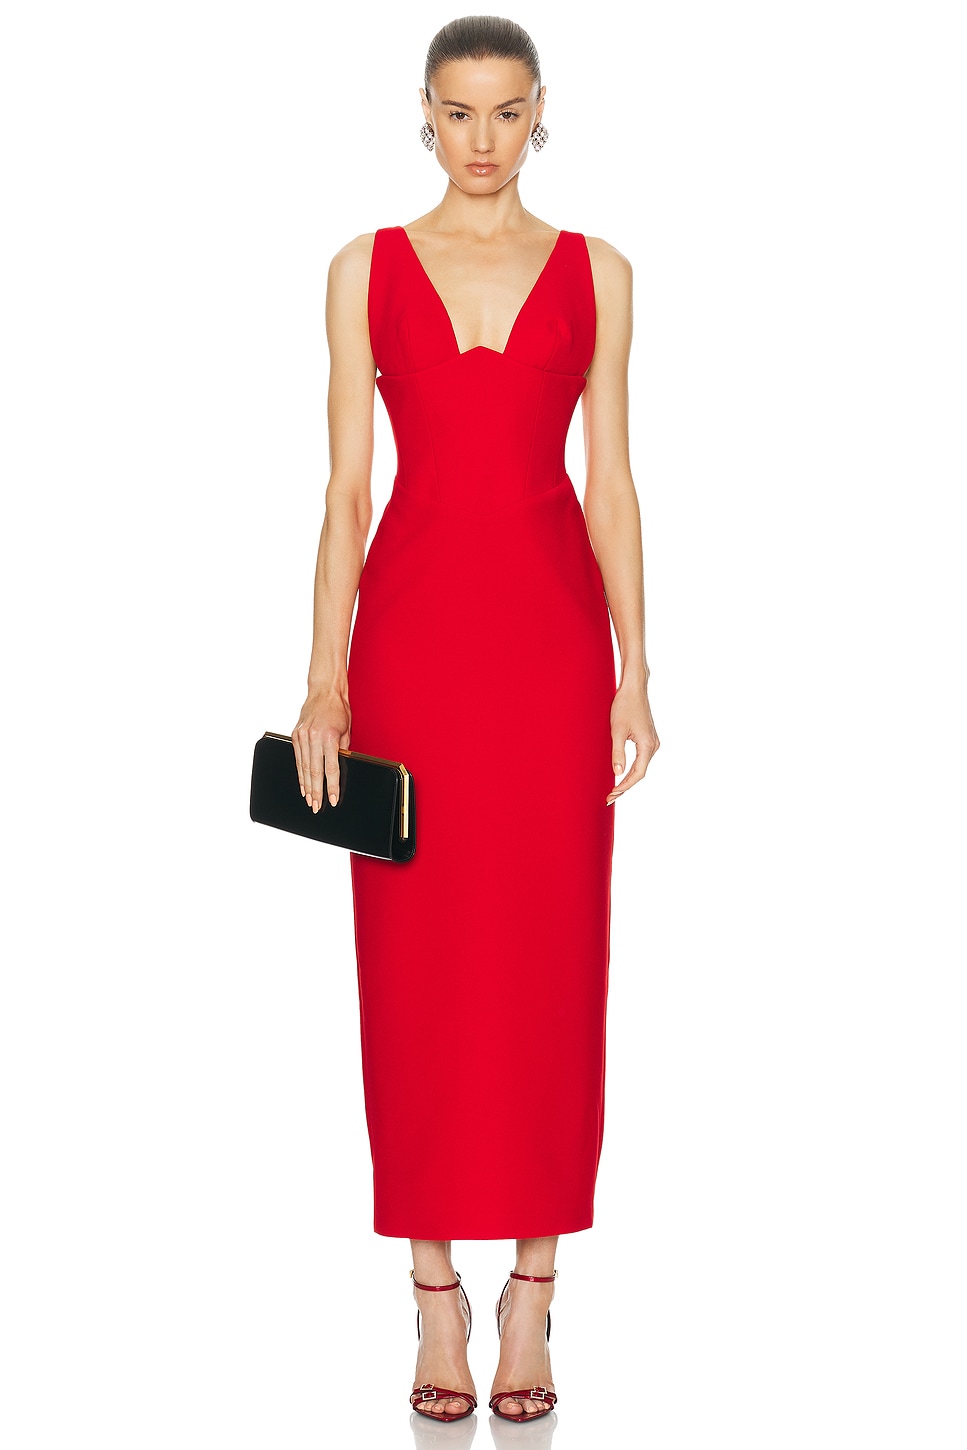 Image 1 of The New Arrivals by Ilkyaz Ozel Anais Dress in Pedro Red